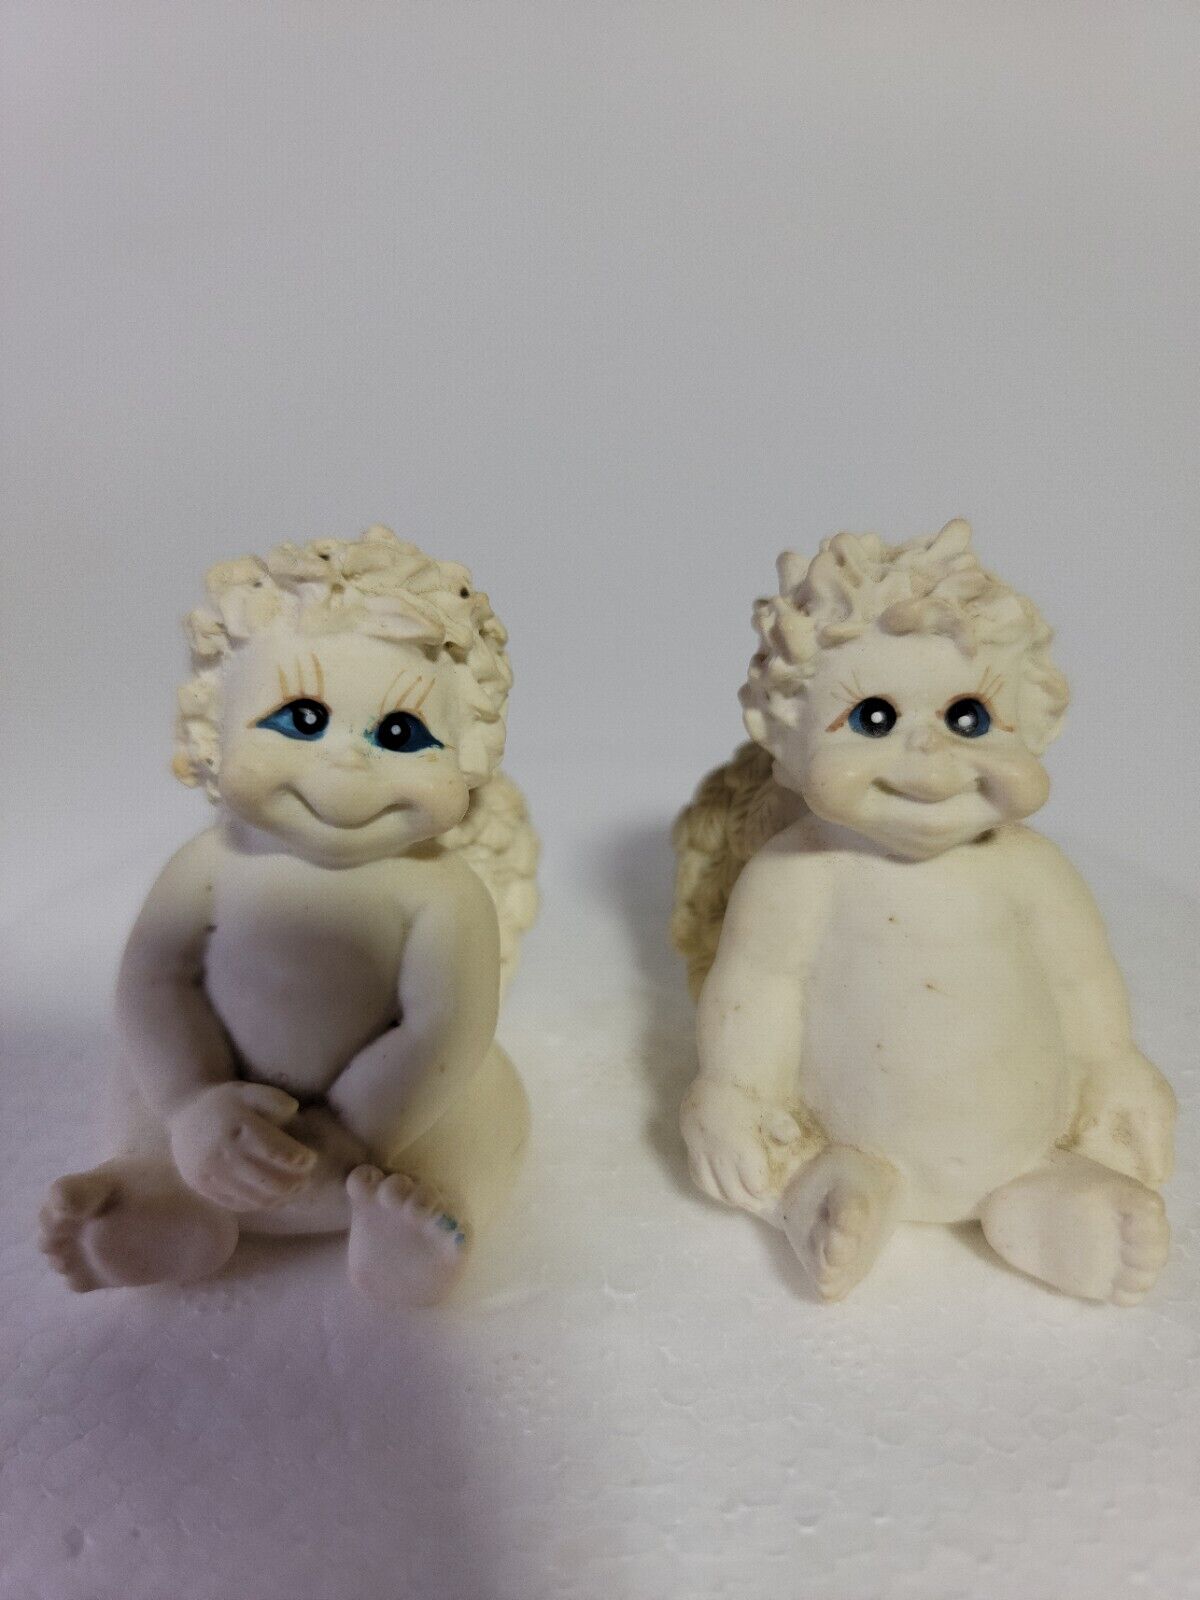 Dreamsicles Blue Eyed Angel Cherub Figurines off white color